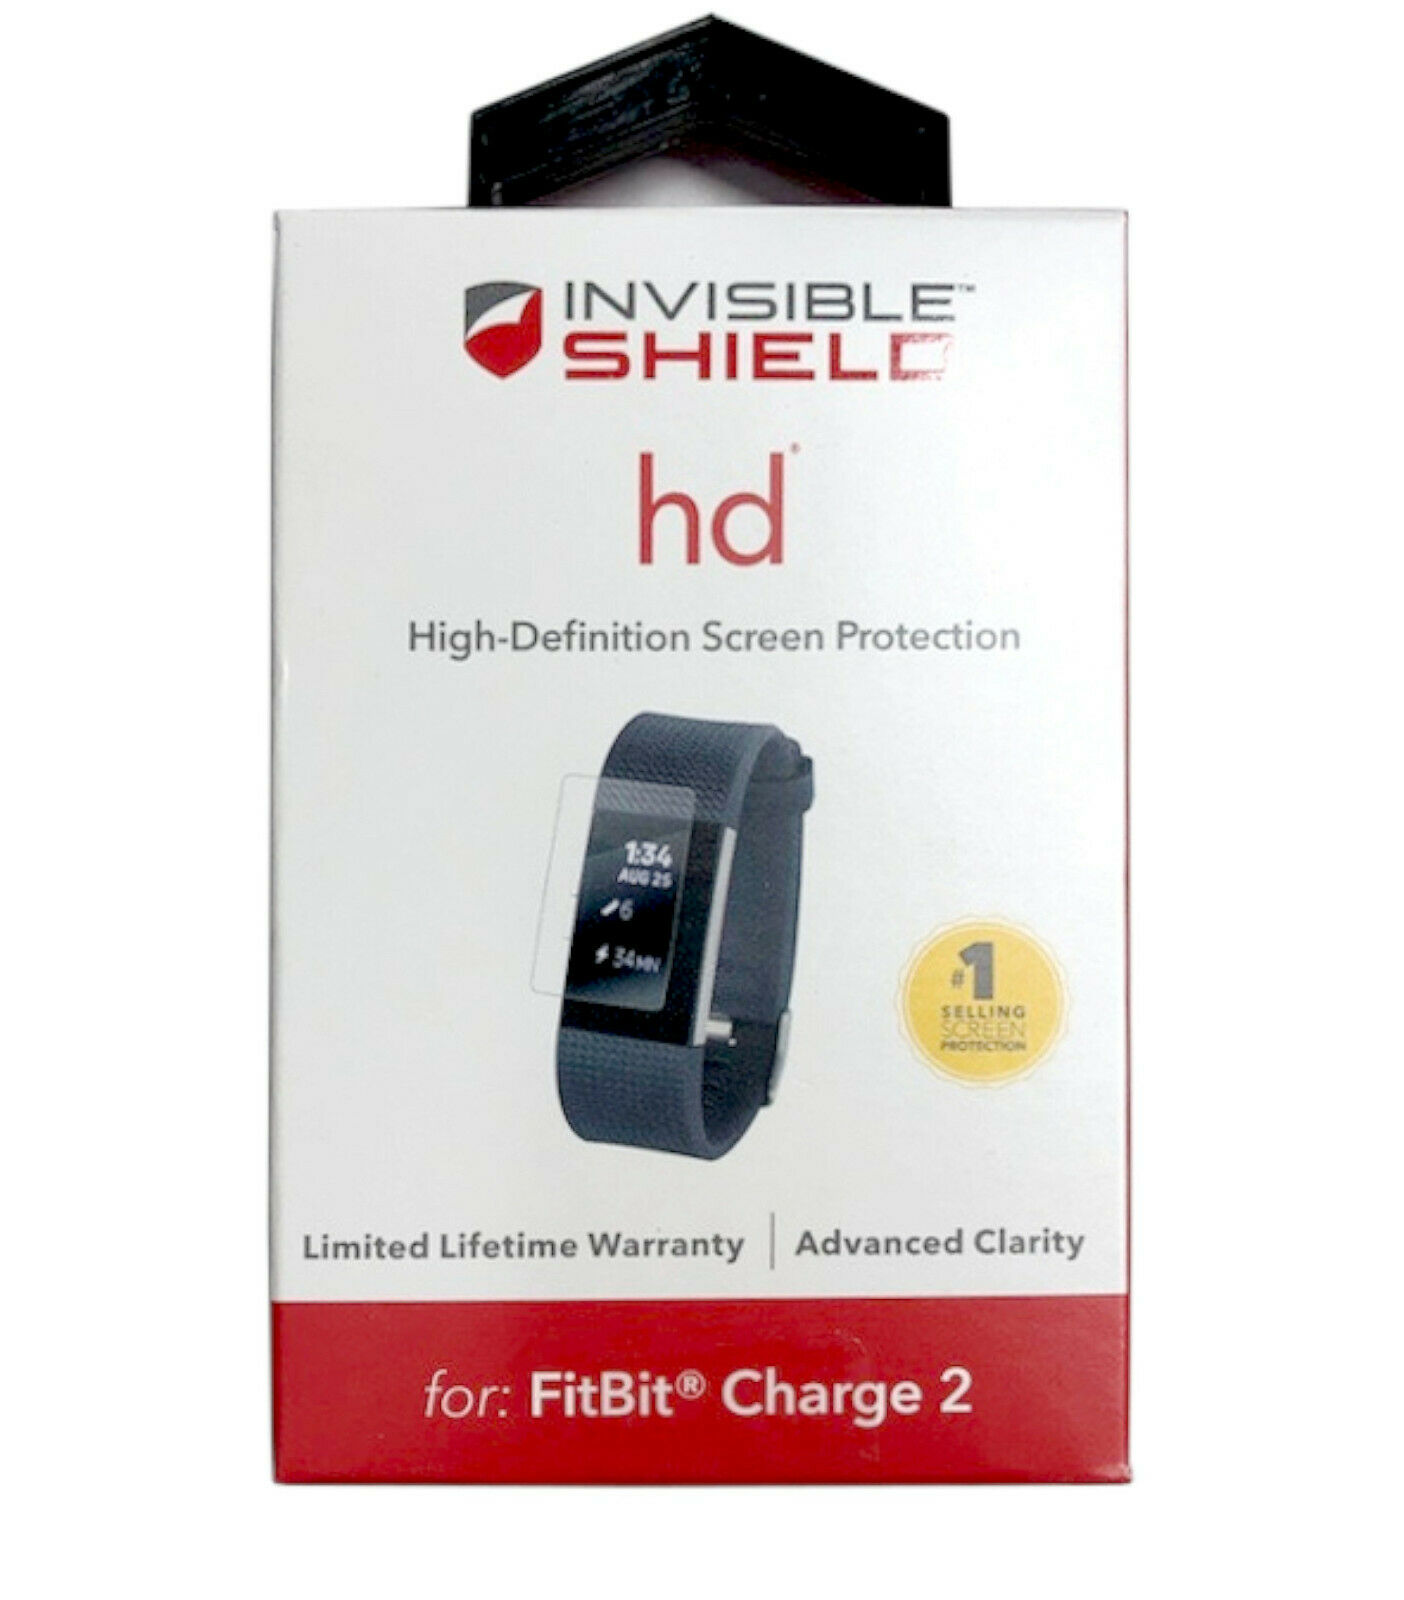 NEW ZAGG InvisibleShield HD Screen Protector for Fitbit Charge 2 ultra clear